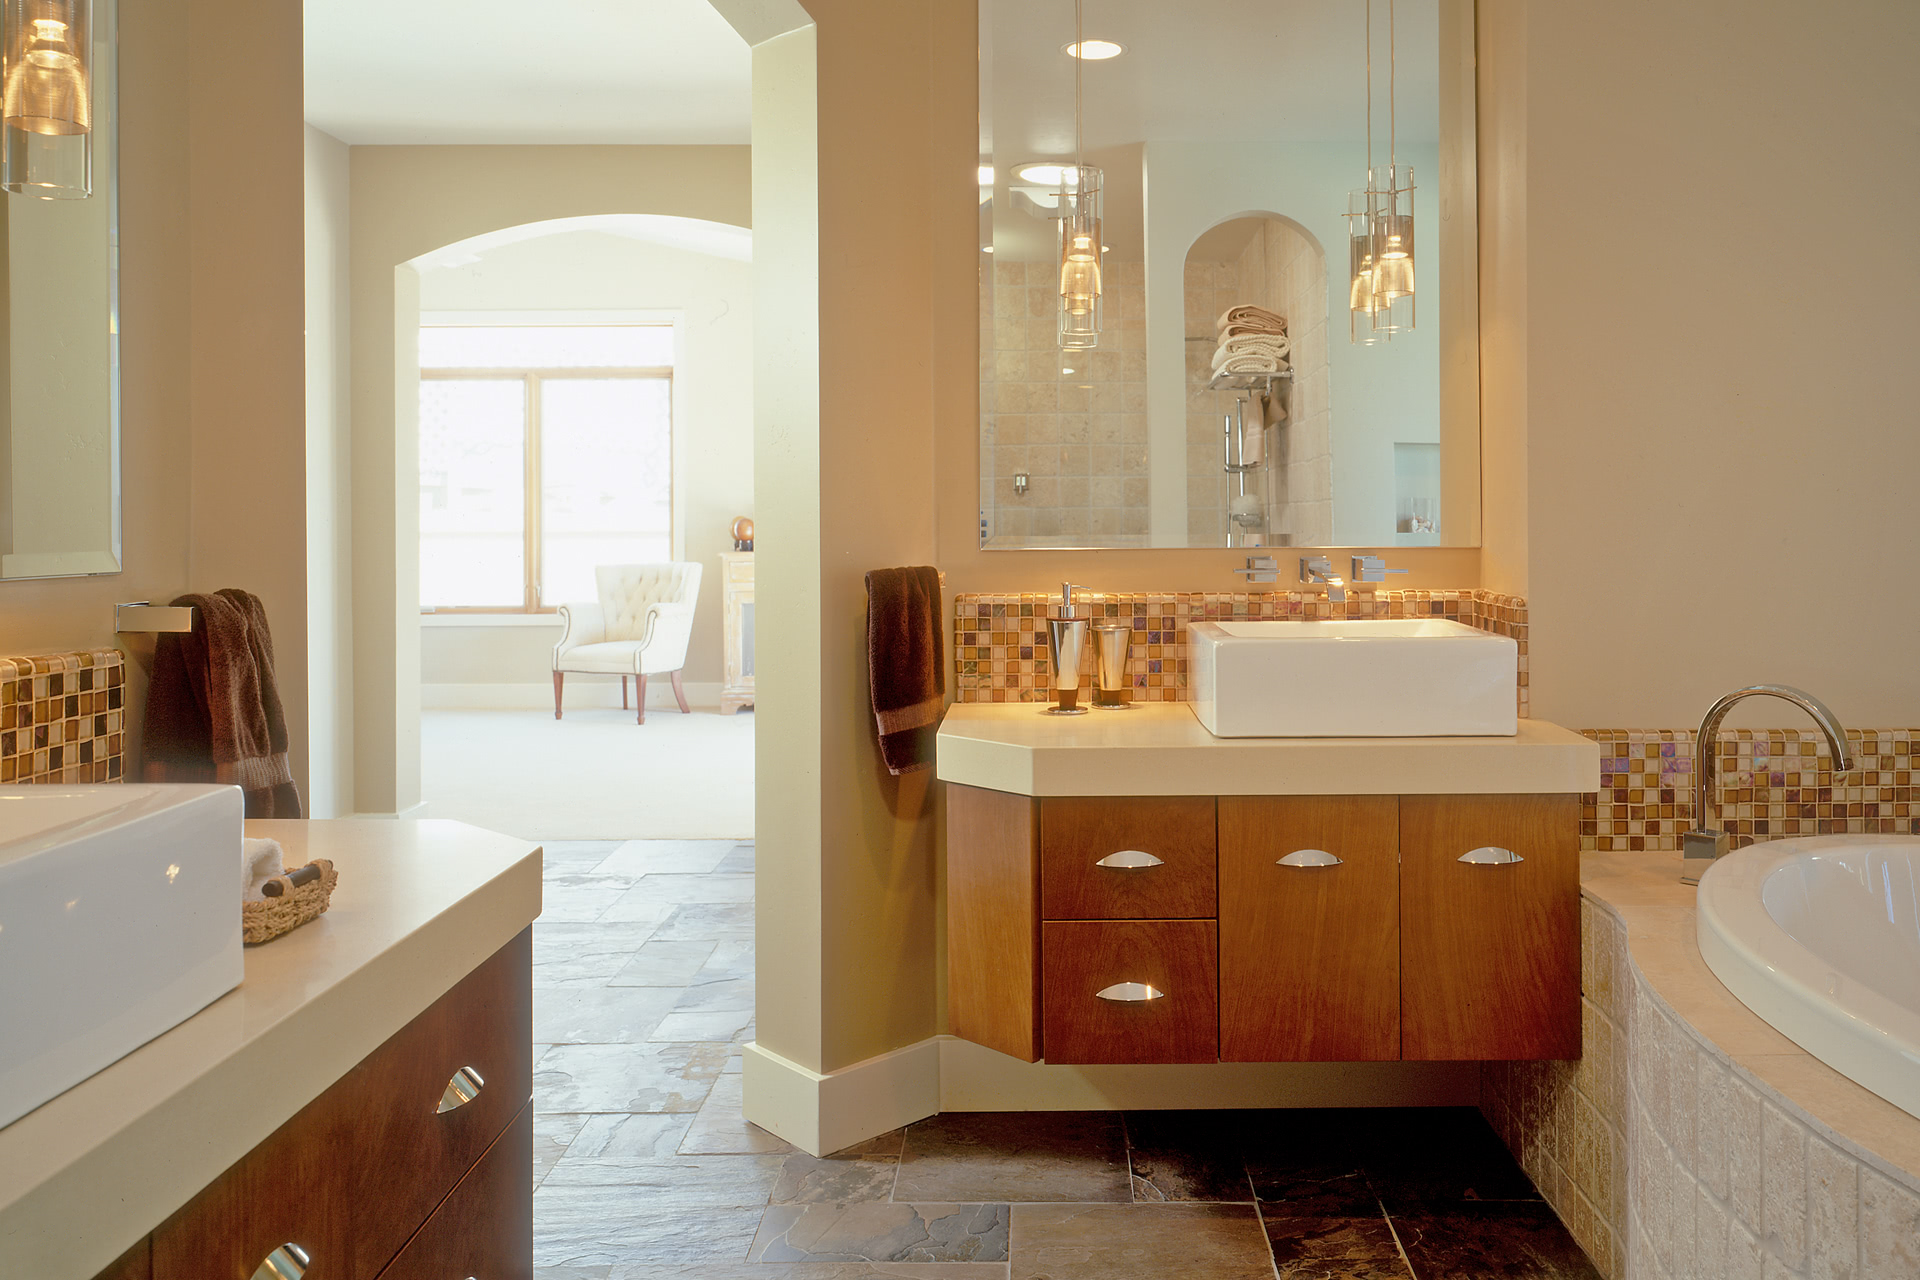 Custom Bathroom Cabinets - Curved Face Sinks Two Level Vessel Sinks